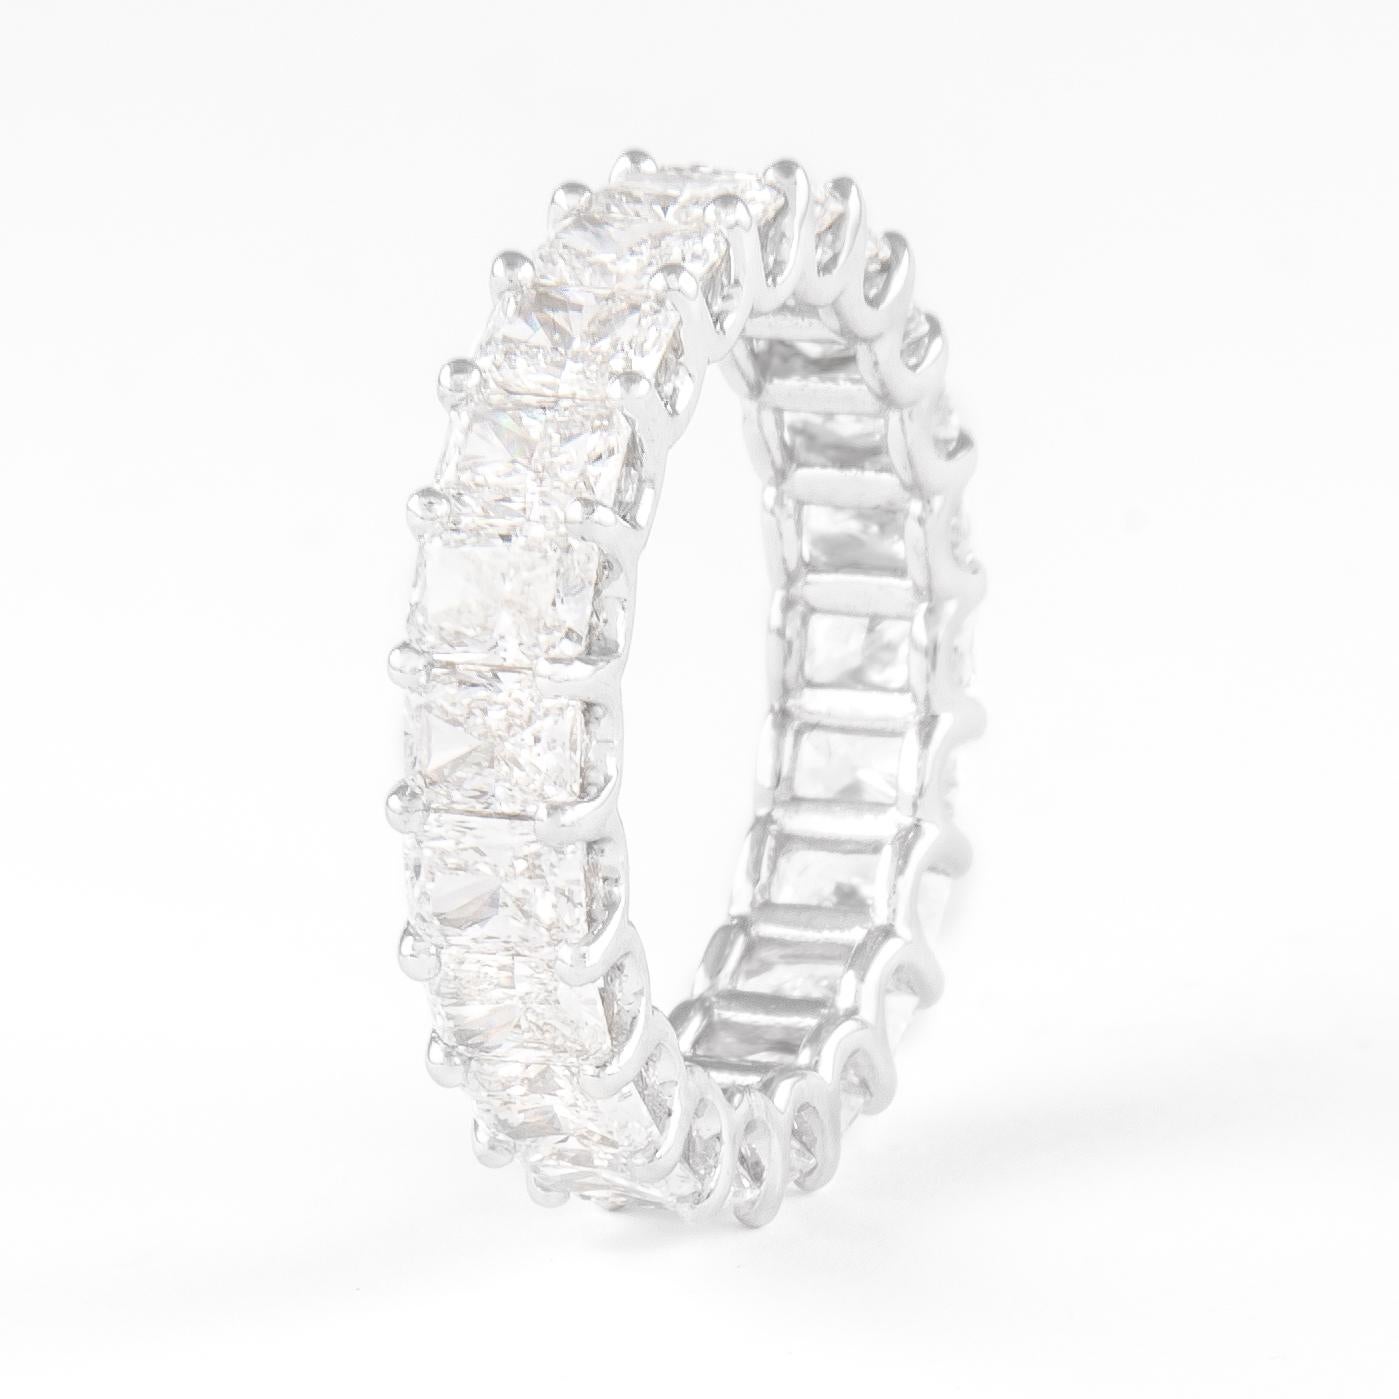 Stunning radiant cut diamond eternity band, by Alexander Beverly Hills.
22 radiant cut diamonds, 4.59 carats total. Approximately D/E color and VS clarity. Set in 18k white gold, 4.25 grams, size 6.5. 
Accommodated with an up-to-date appraisal by a